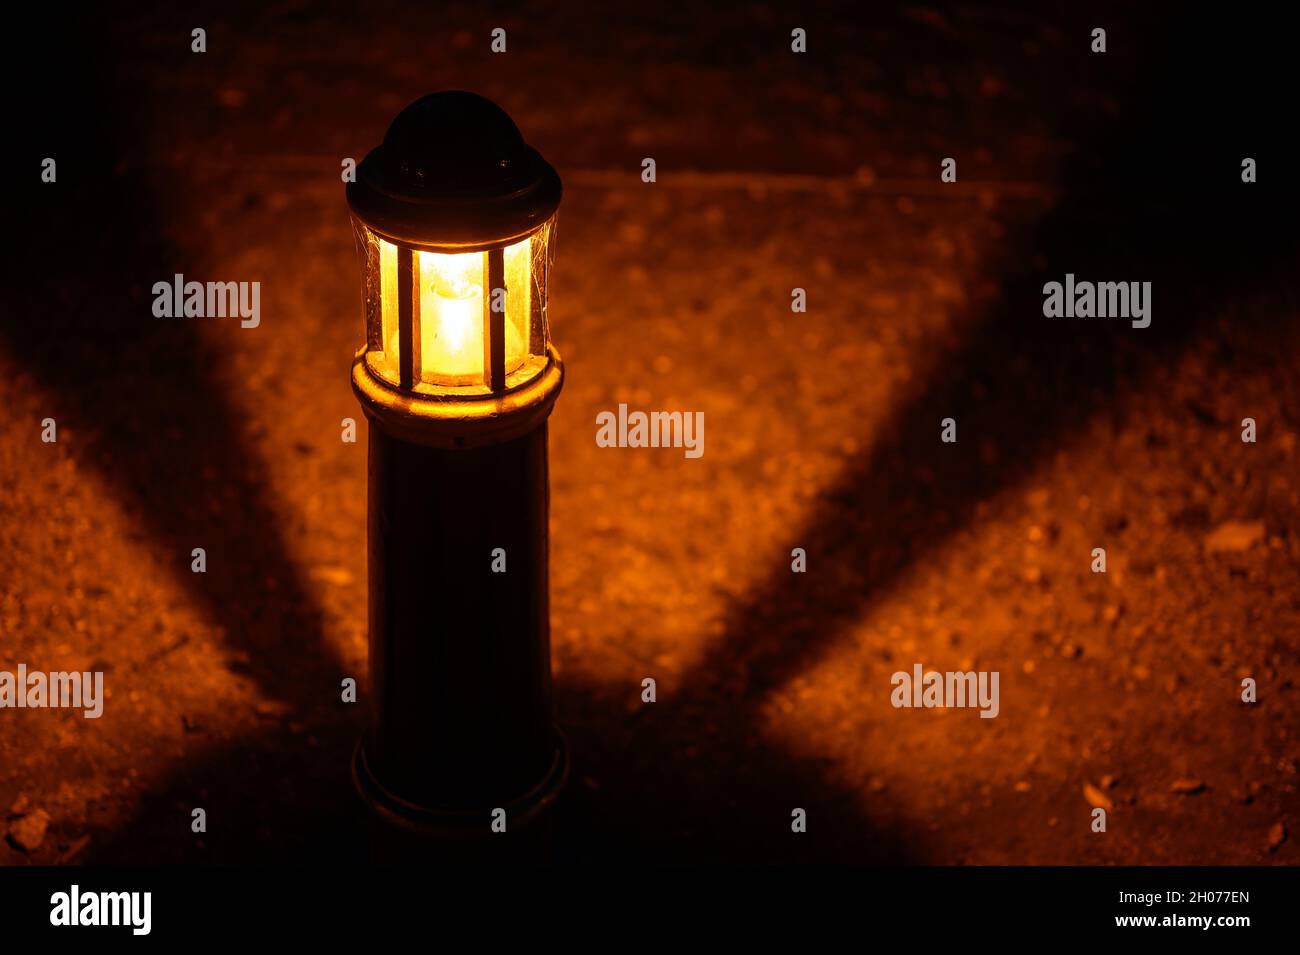 Lamp or light at night in a park with shadows in a circular pattern. The light illuminates a stony pathway. Off-center view of lamp with spider web. Stock Photo